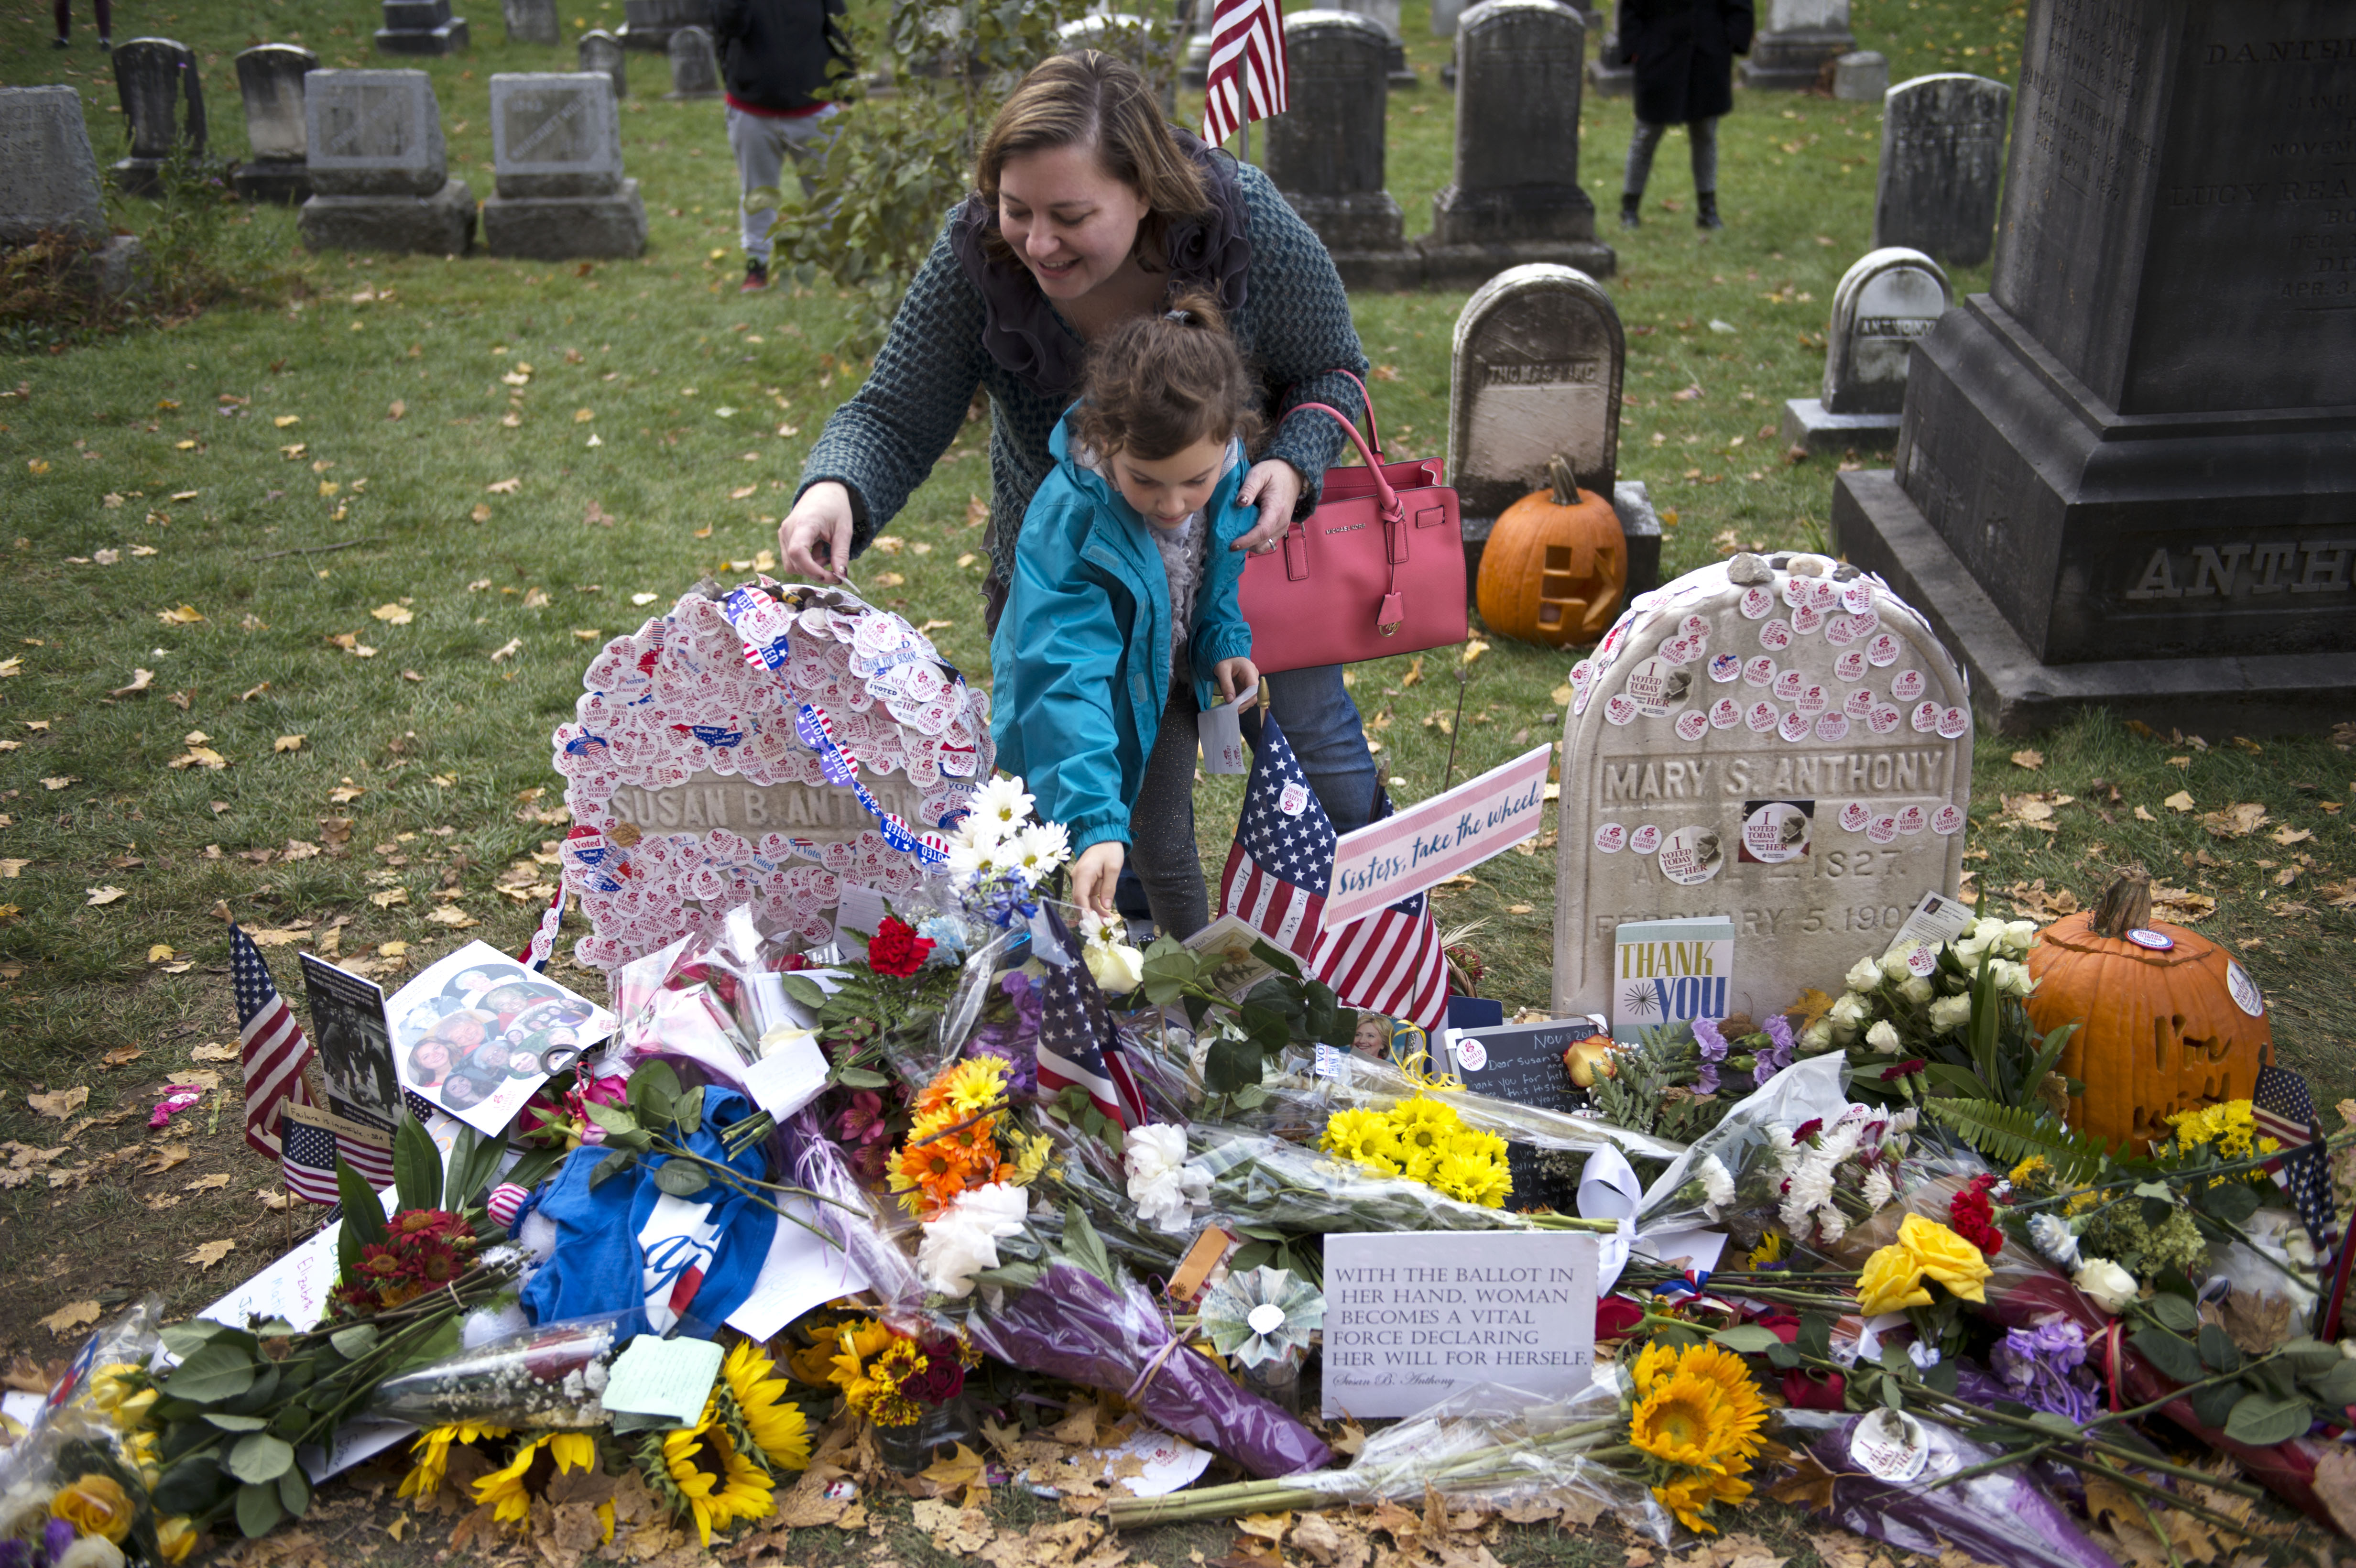 Voters place their stickers on Susan B. Anthony's grave in Mount Hope Cemetery after being able to vote for a woman on a major party ballot for the first time in Rochester, N.Y. on Nov. 8, 2016.